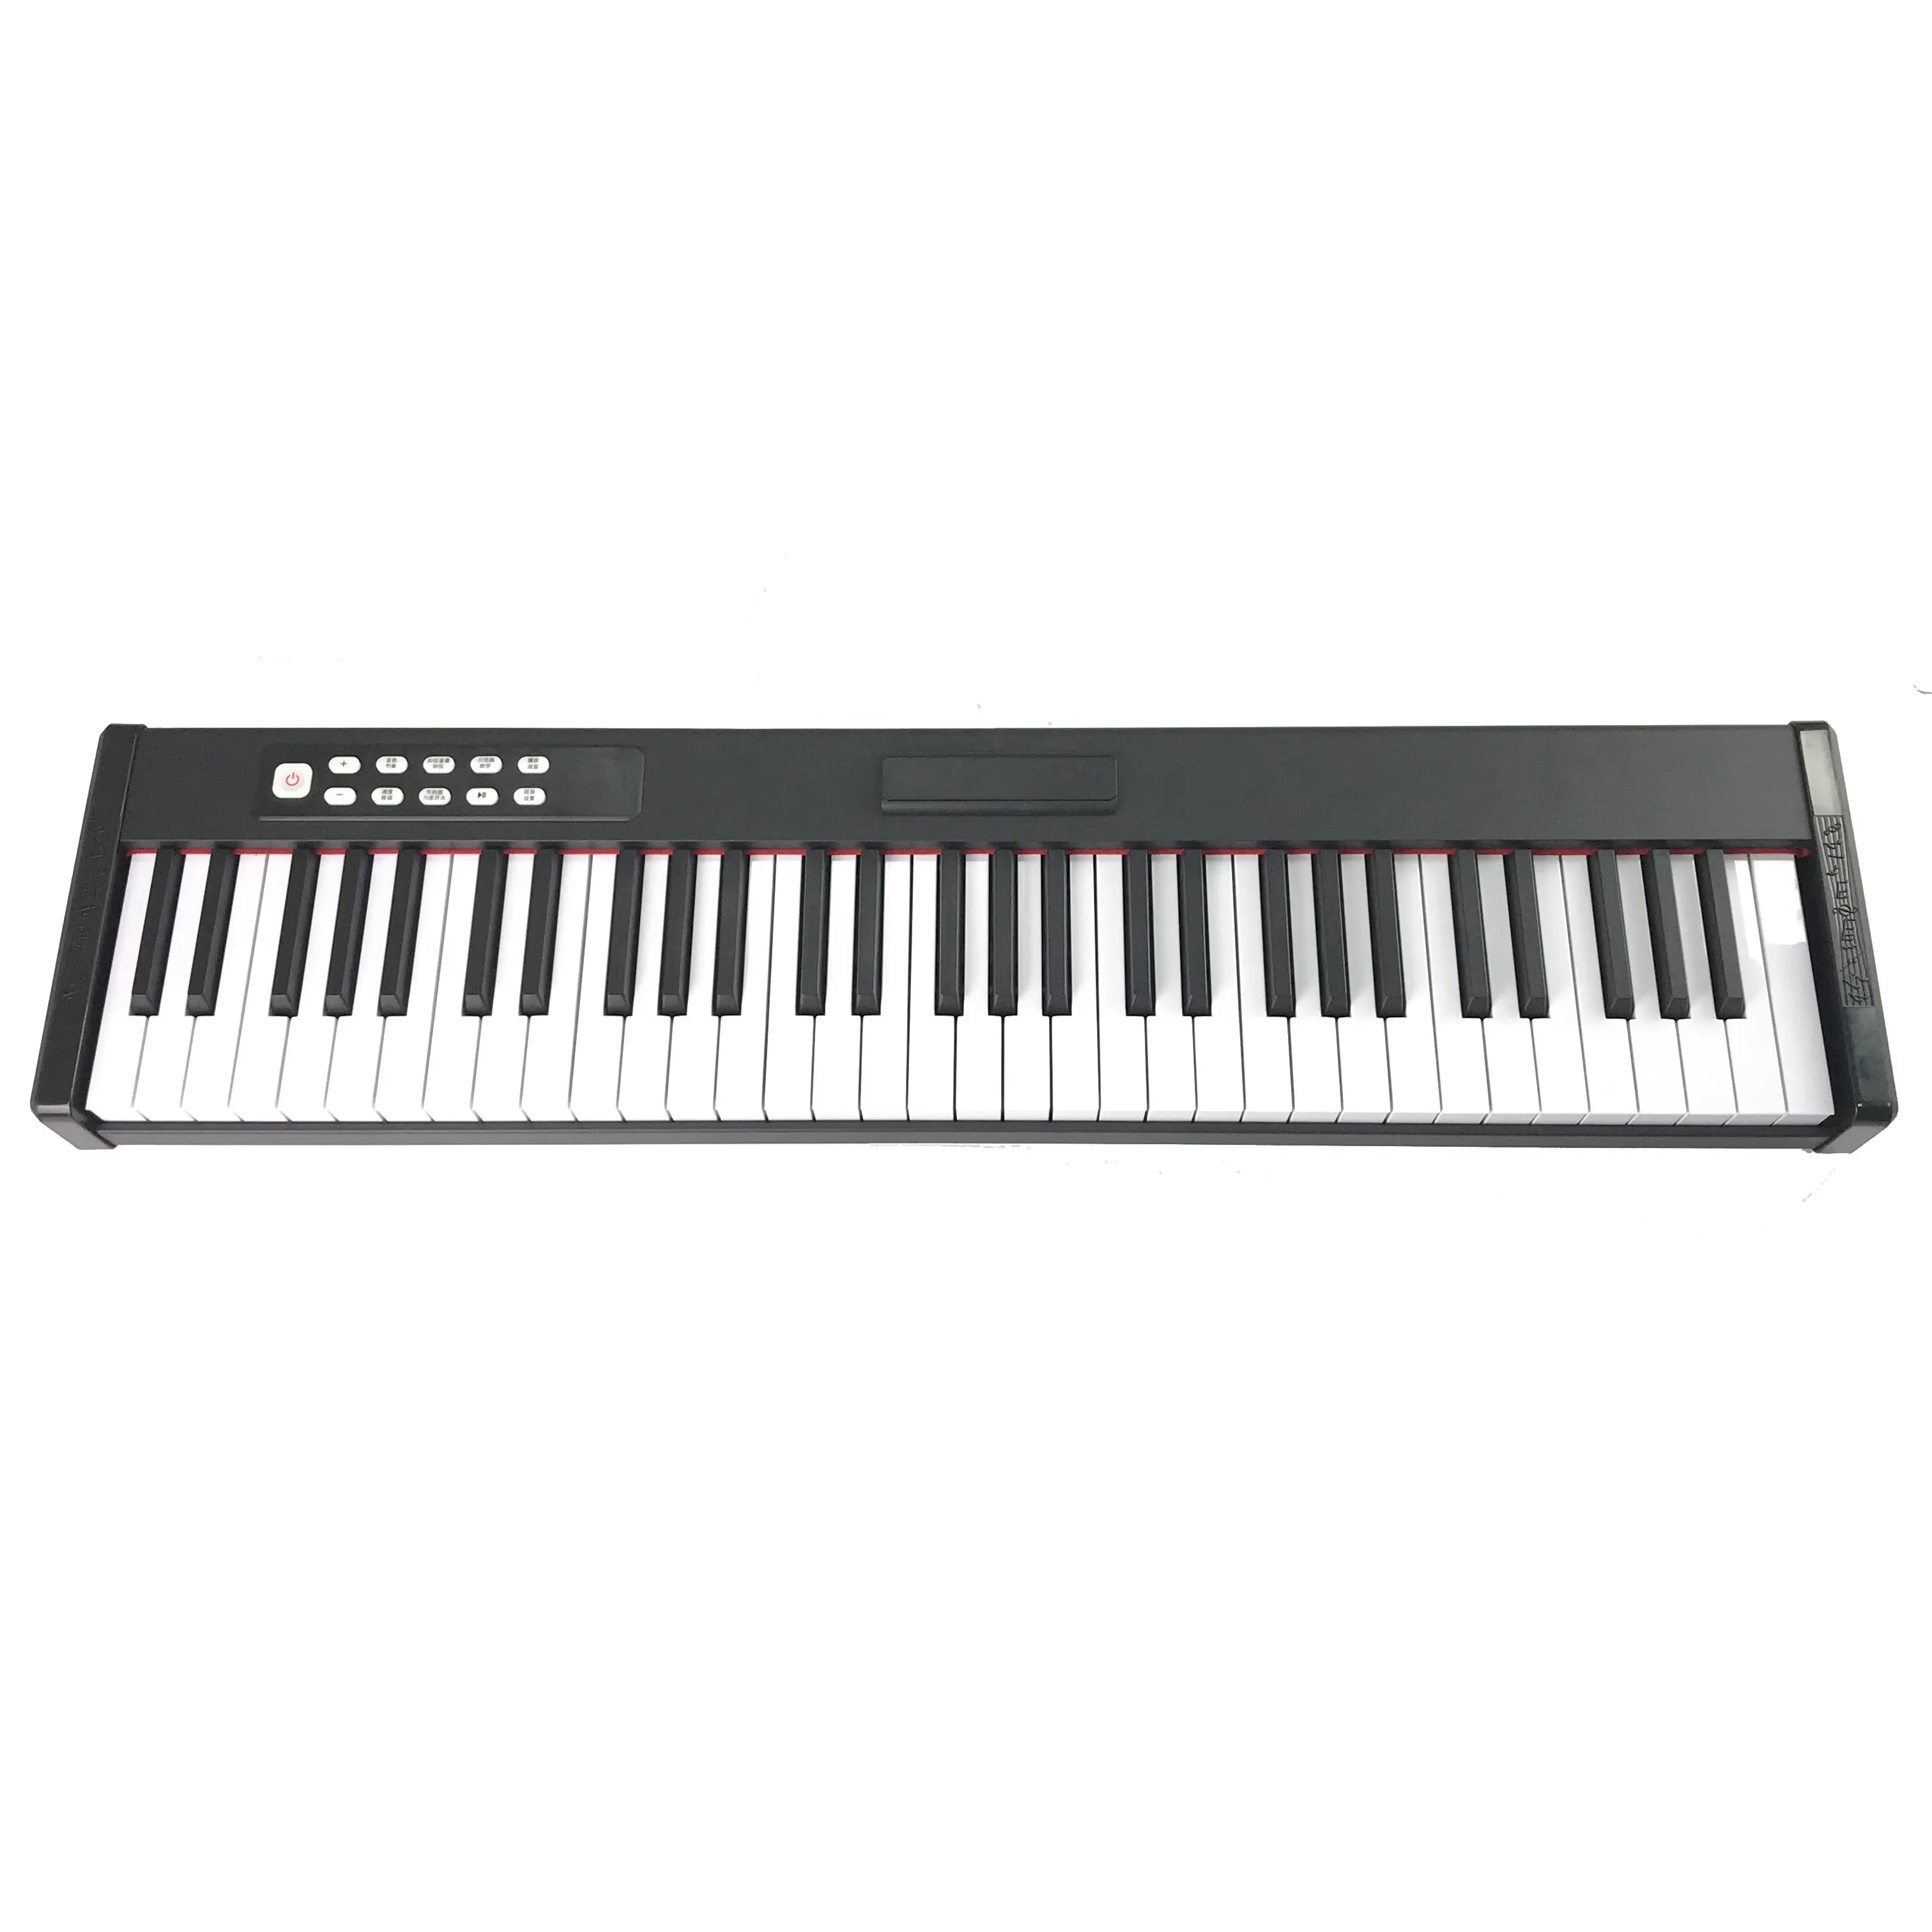 Good Quality Costour Portable Digital 88 Key Piano Keyboard with Rechargeable Battery and MIDI over USB